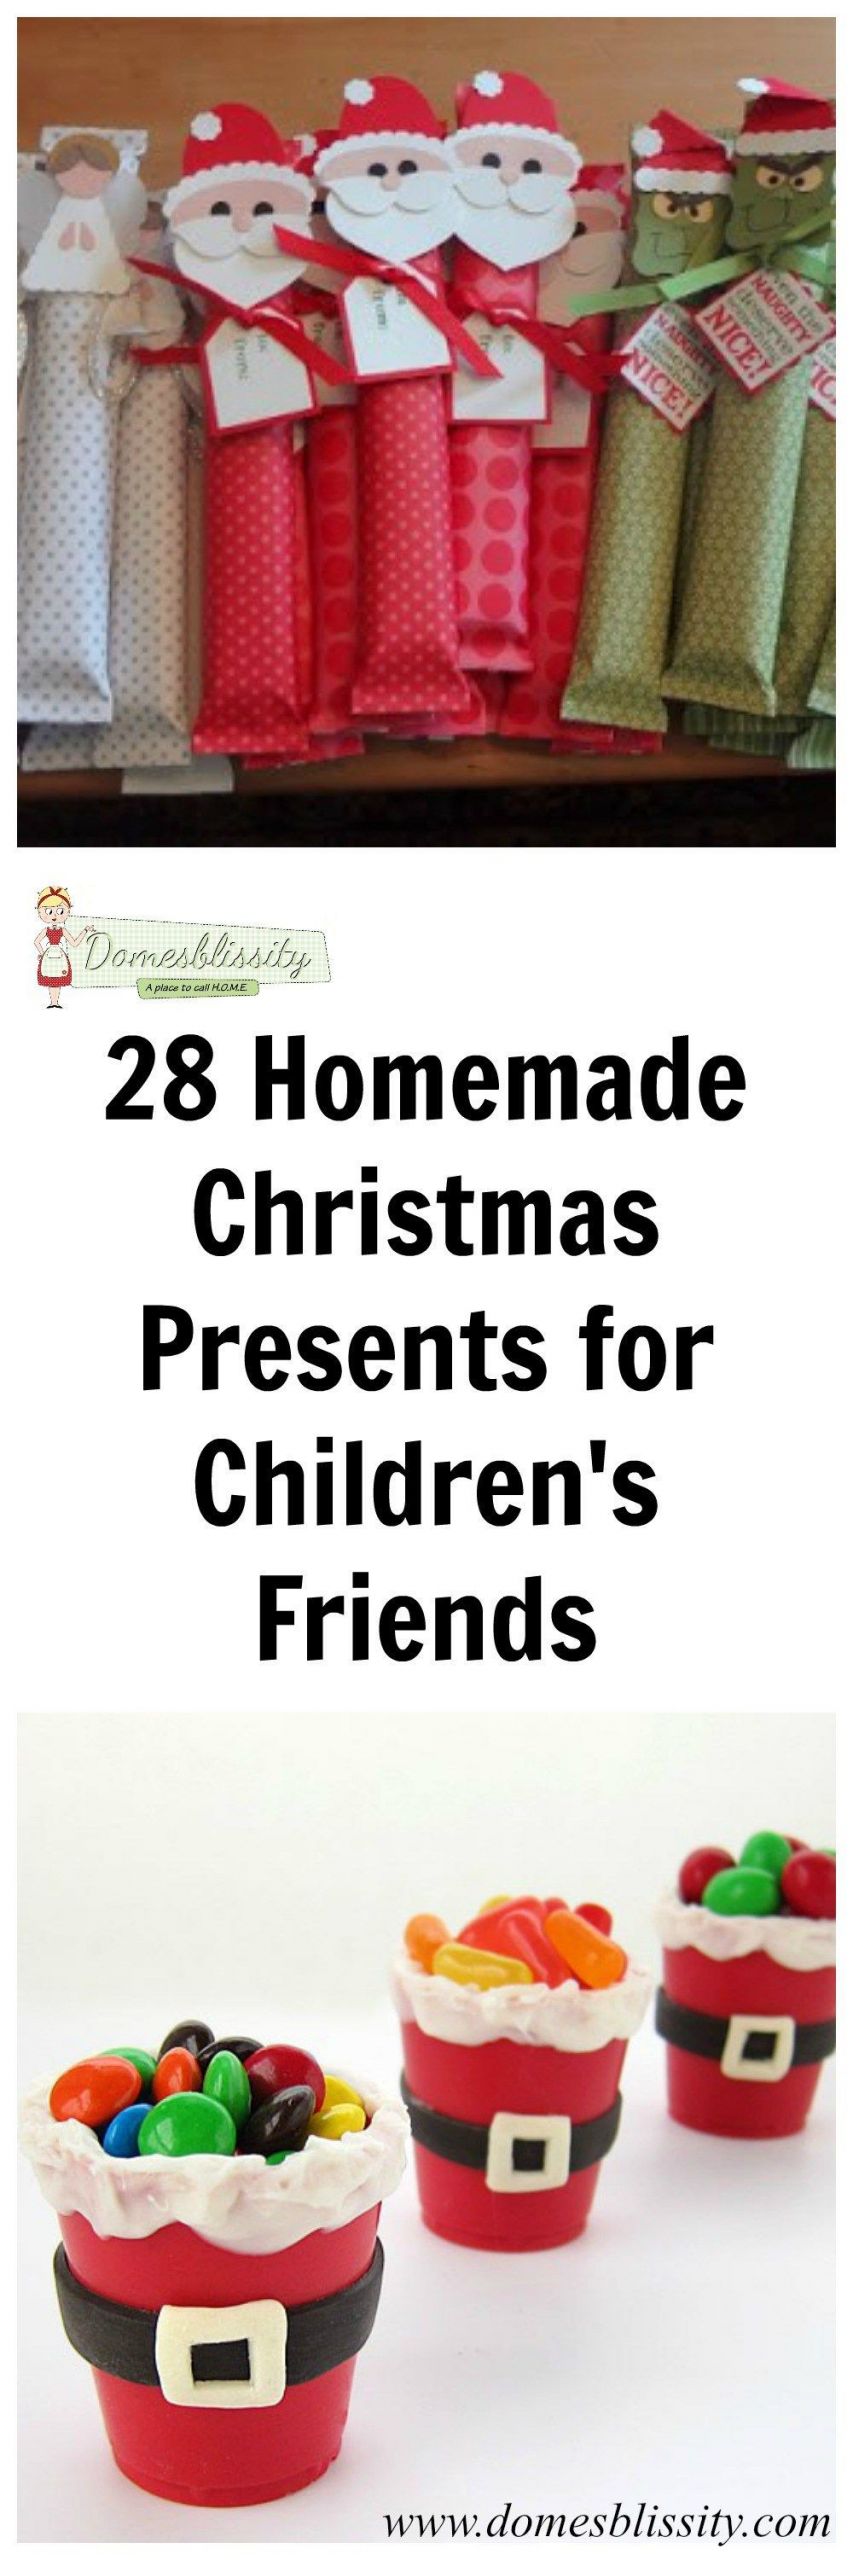 Holiday Gift Ideas For Friends
 Last week I shared with you 21 homemade Christmas presents